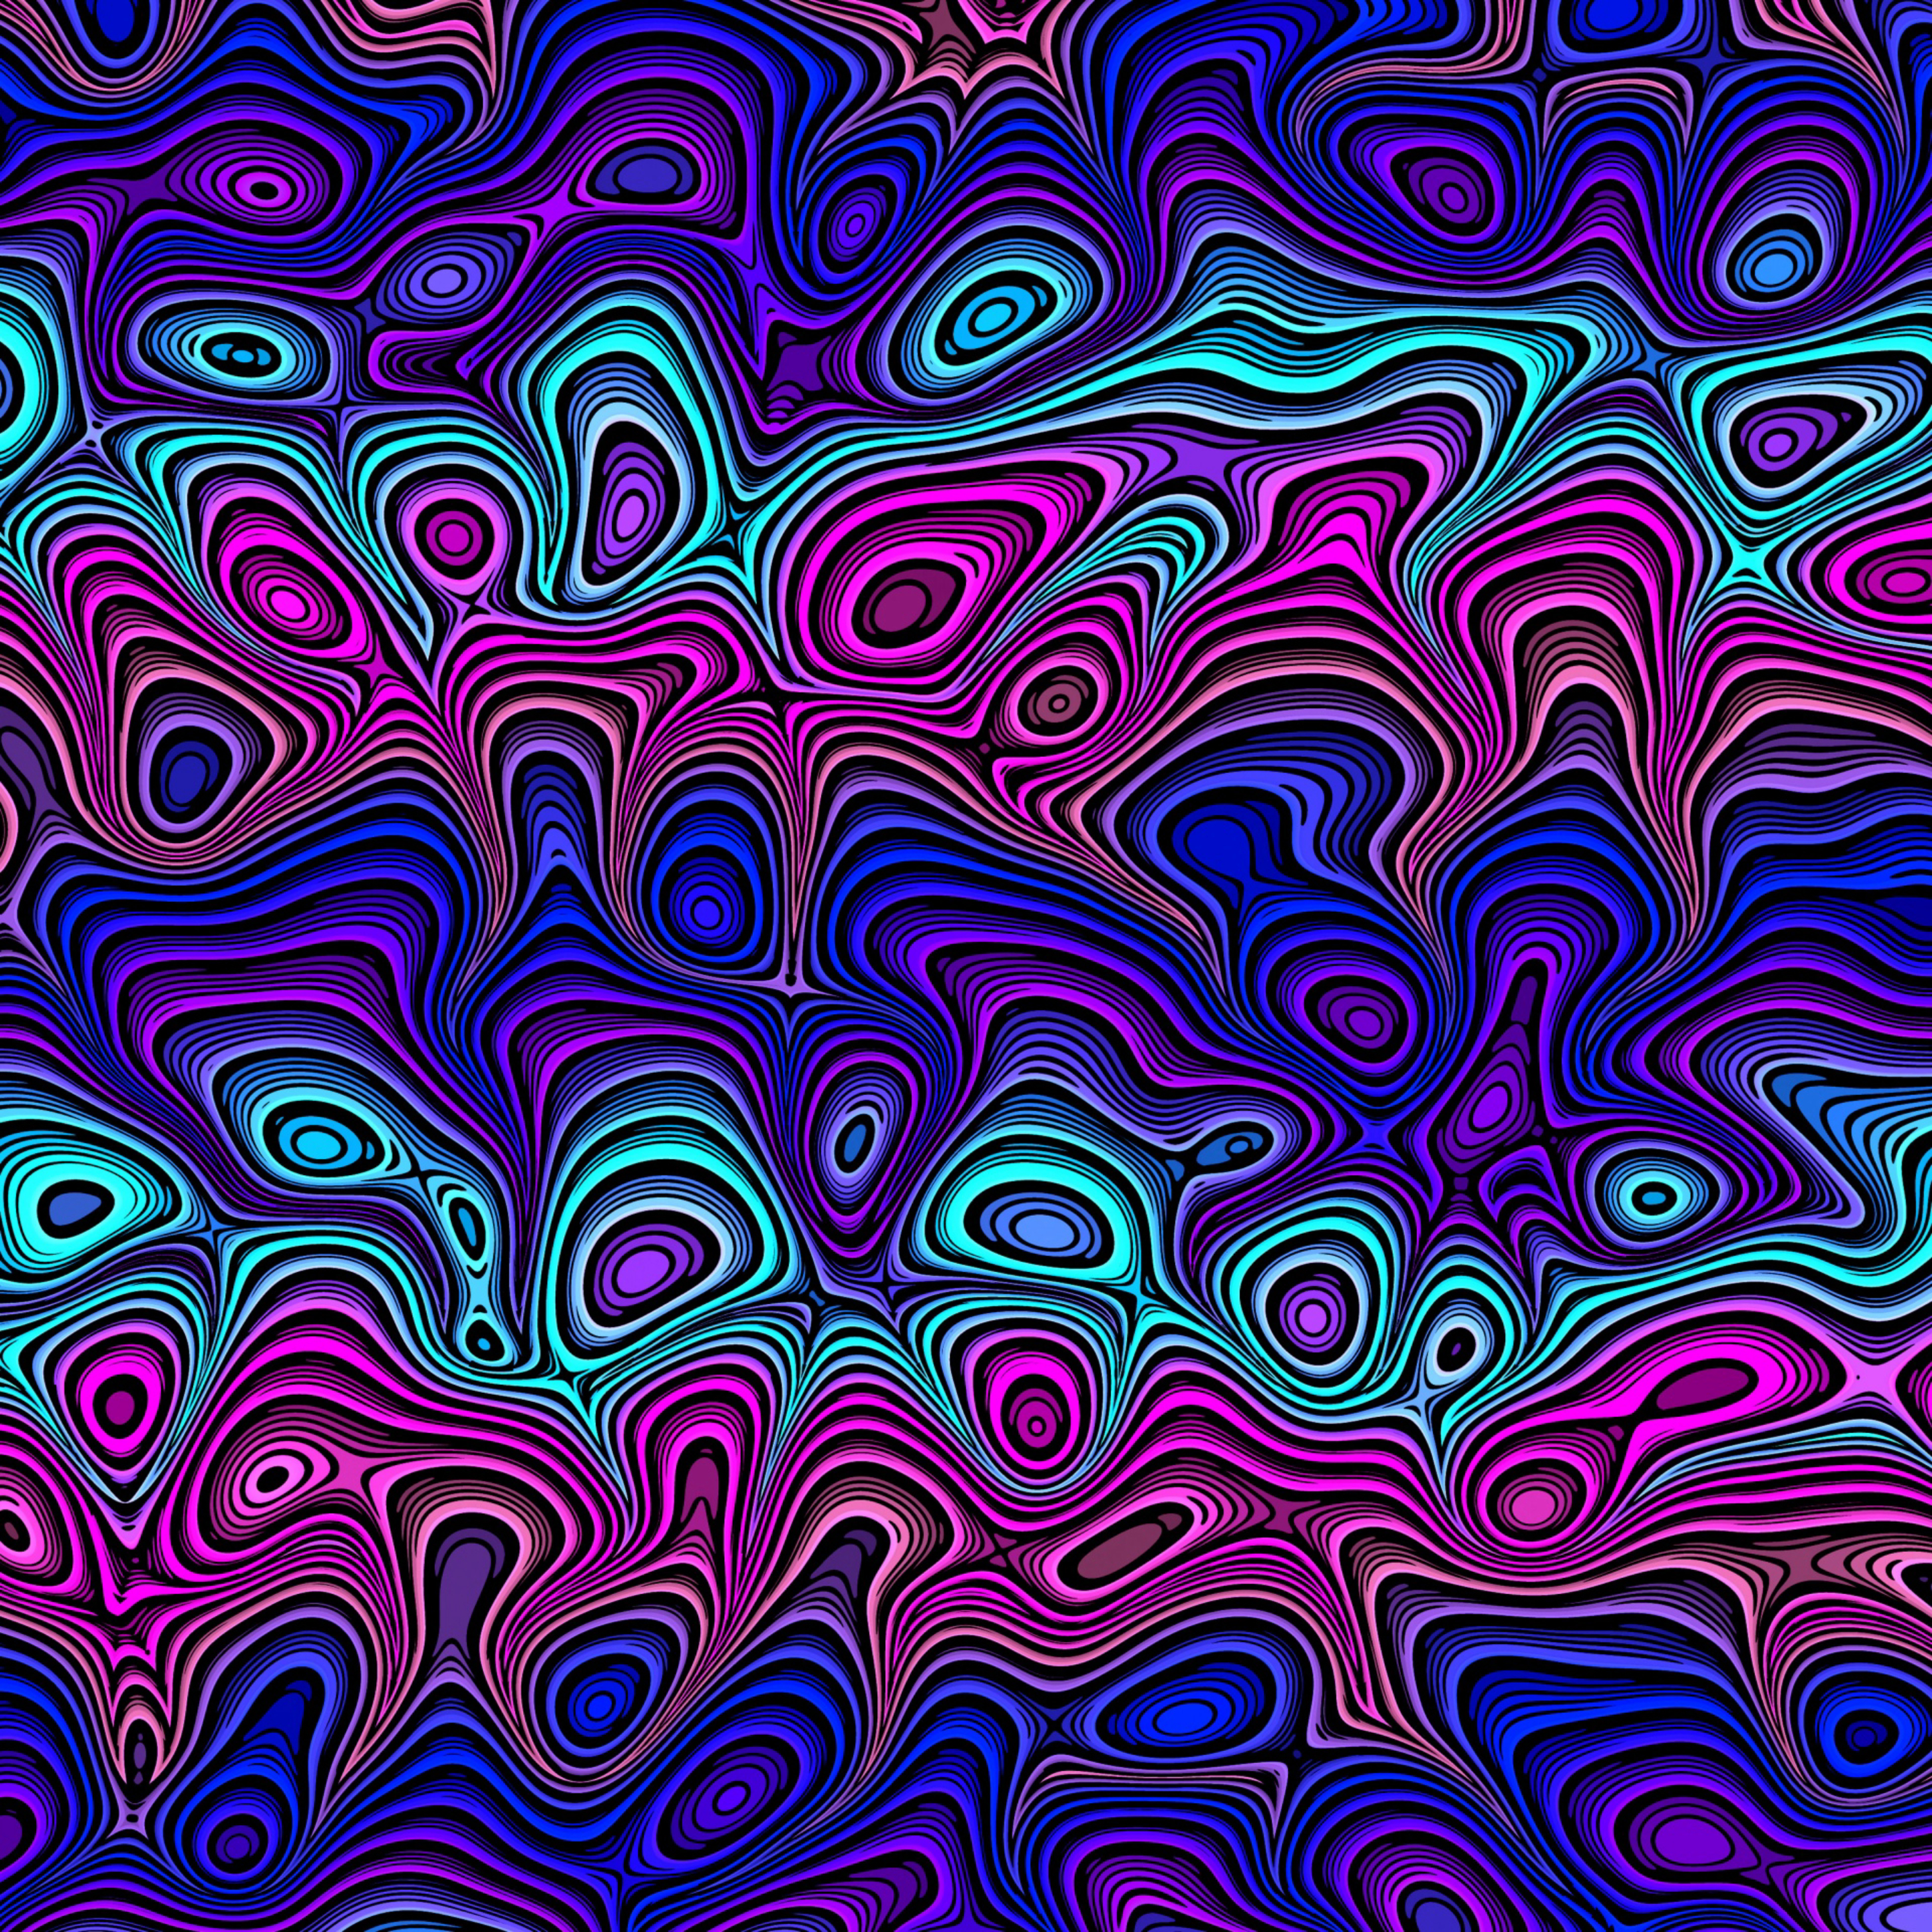 involute, lines, motley, wavy, multicolored, abstract, swirling wallpapers for tablet